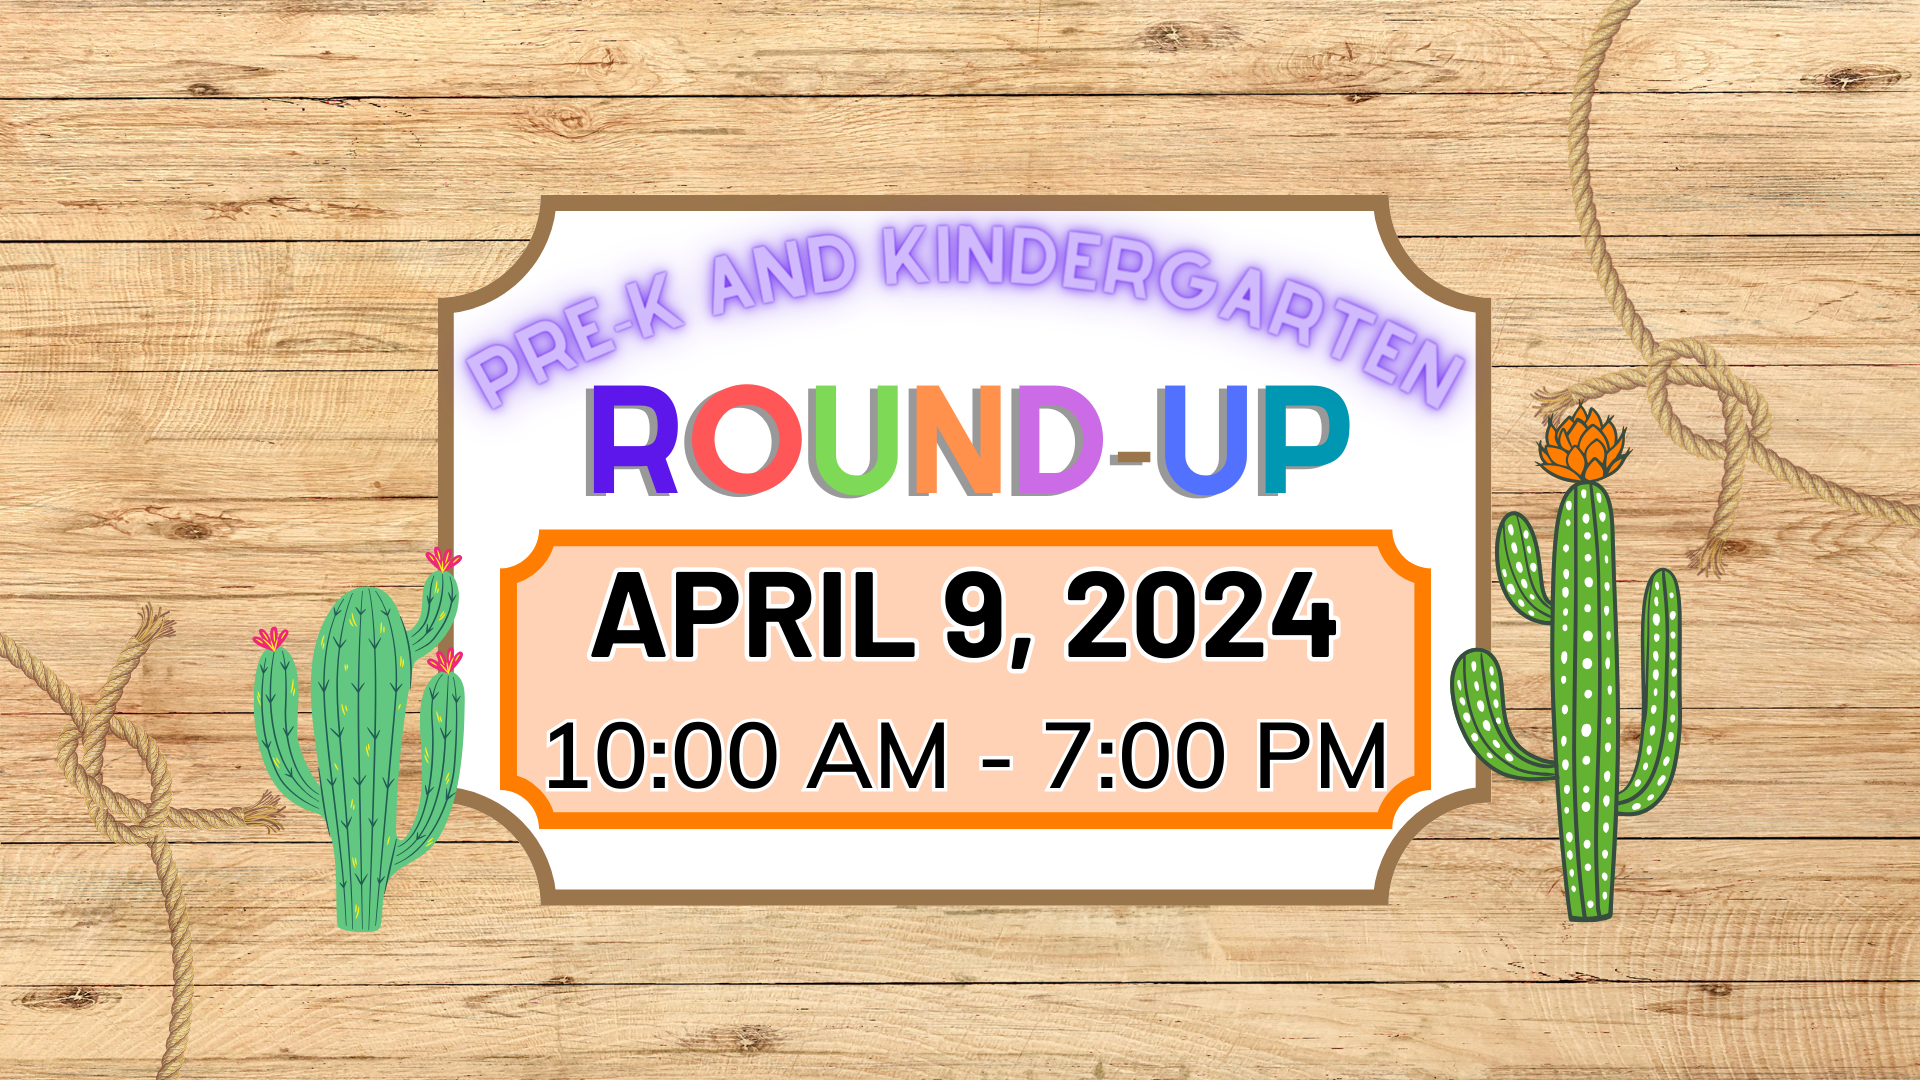 Pre-K and Kindergarten Round-Up April 9 10:00am - 7:00pm